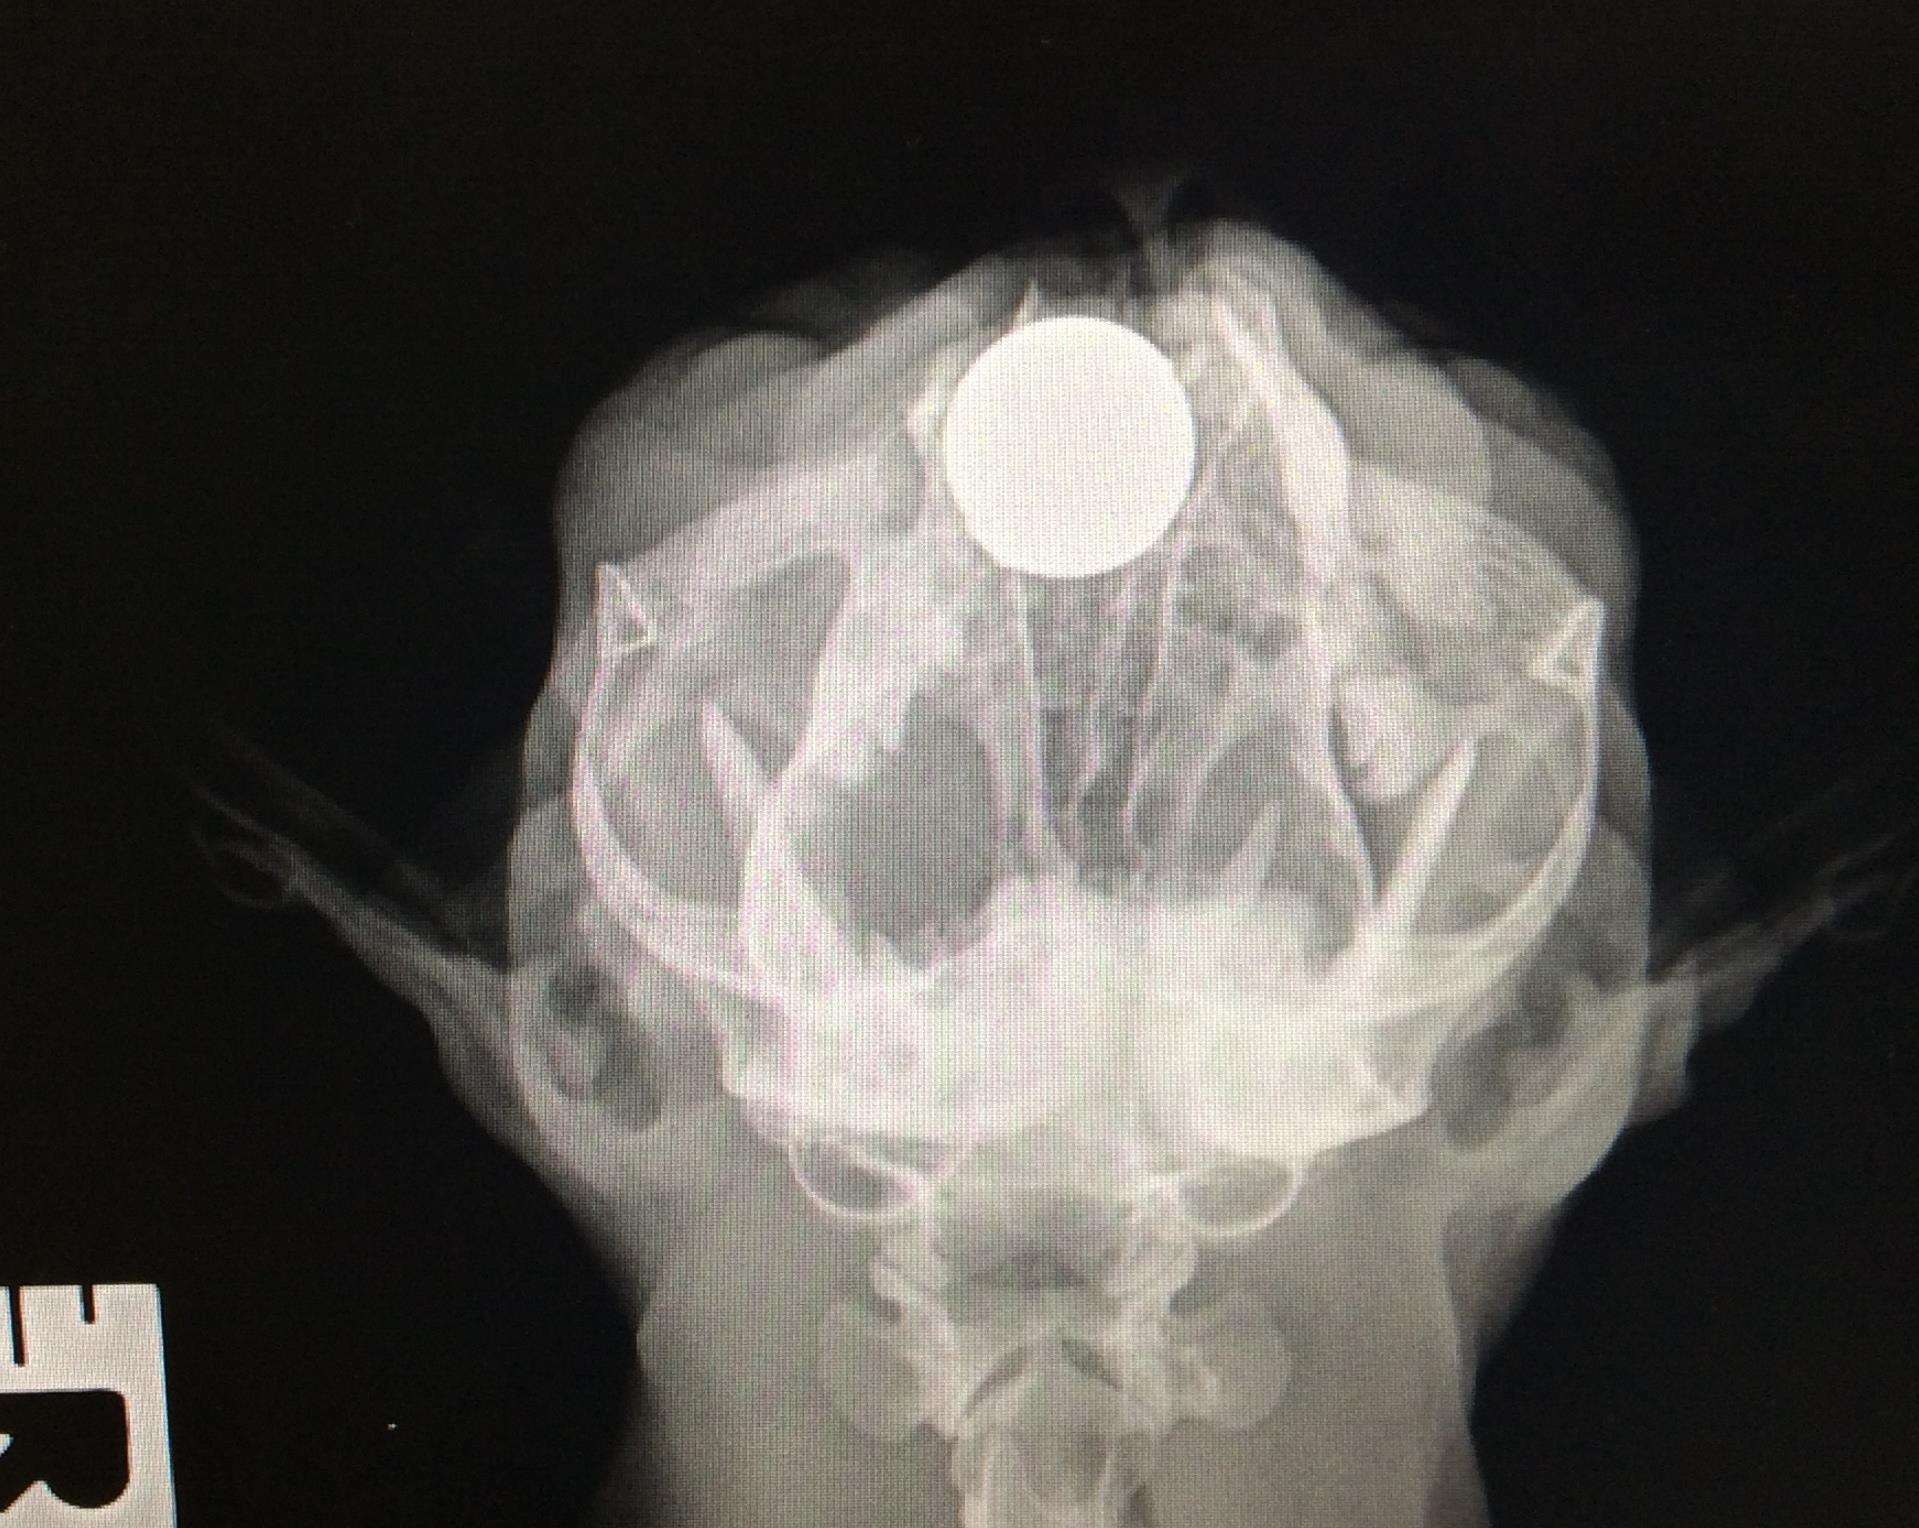 The attack left her with bone fragments inside her skull. Picture: RSPCA (7463955)